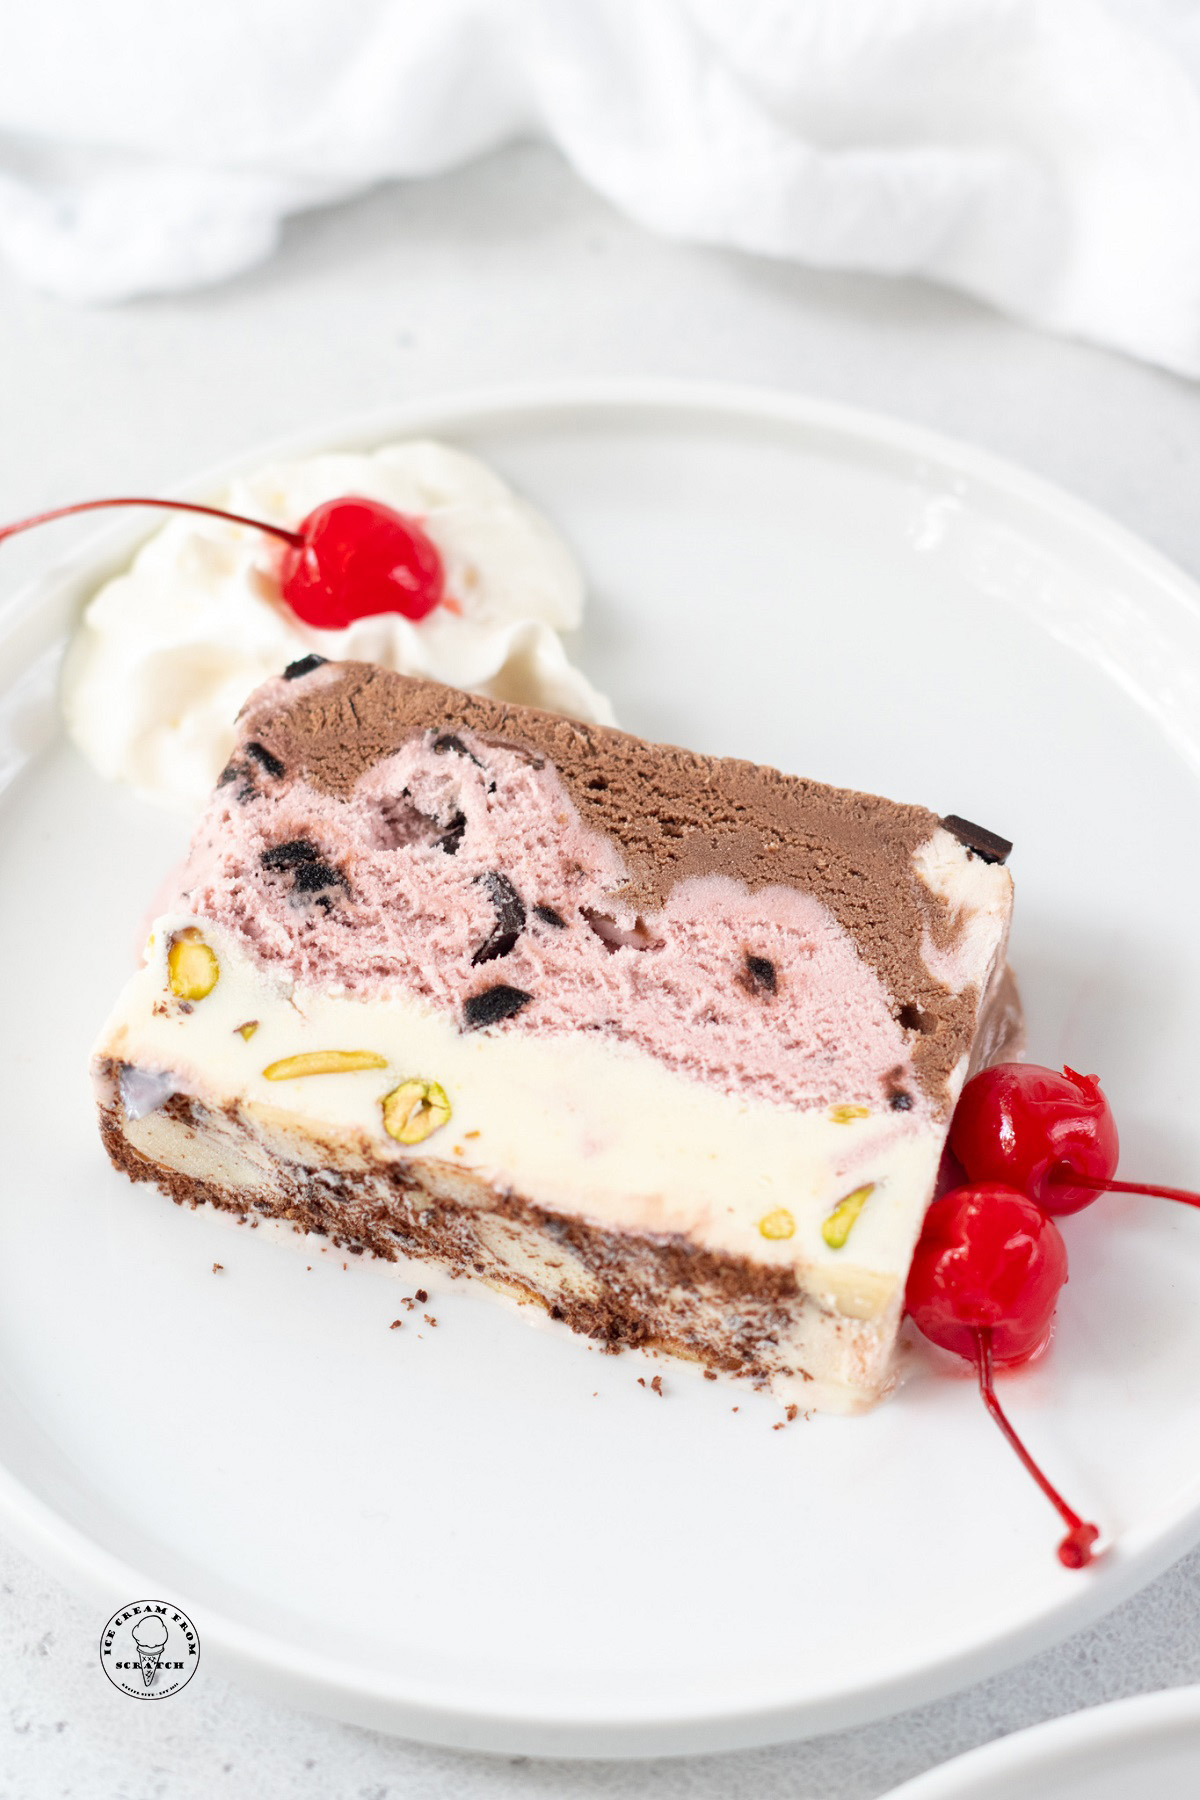 a slice of spumoni with layers of pistacio, cherry, and chocolate ice cream, on a plate with maraschino cherry garnish.